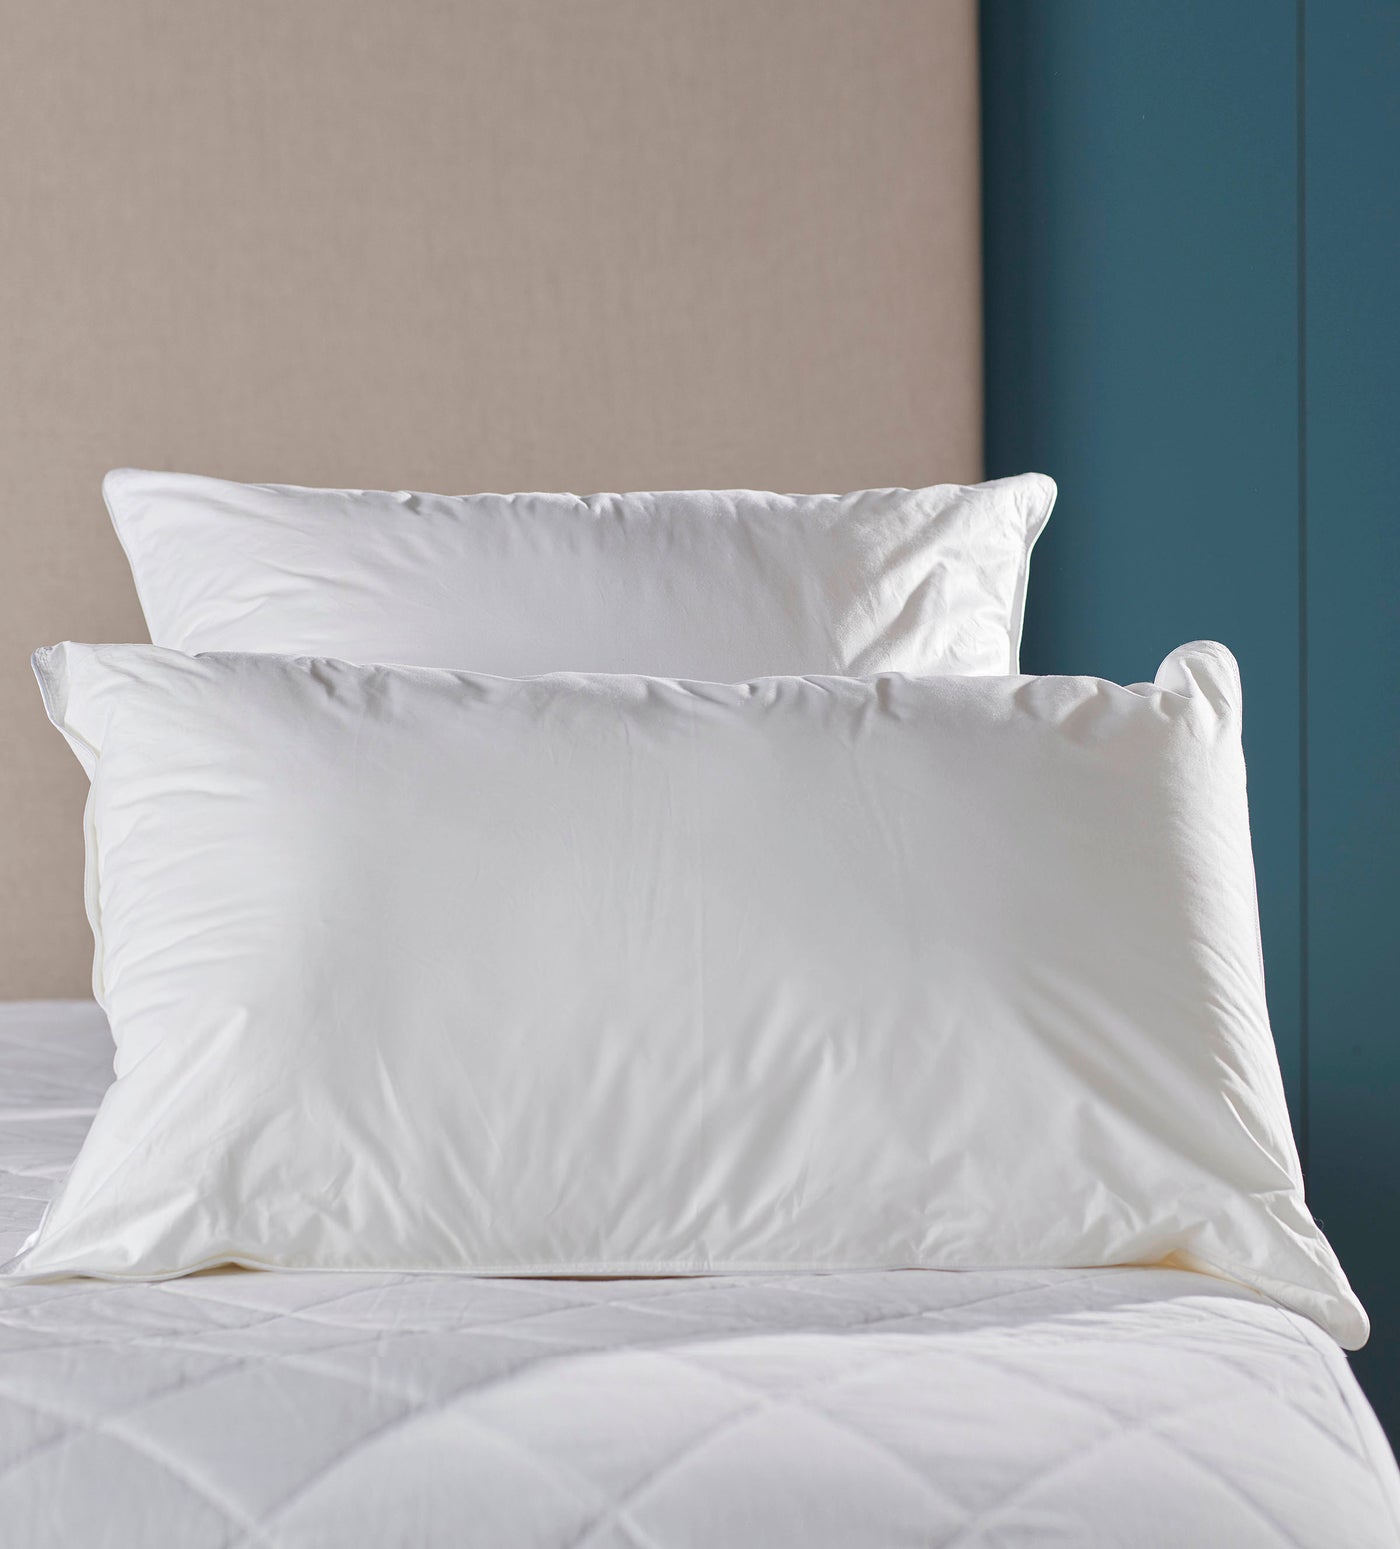 The Big Softie Synthetic Pillow